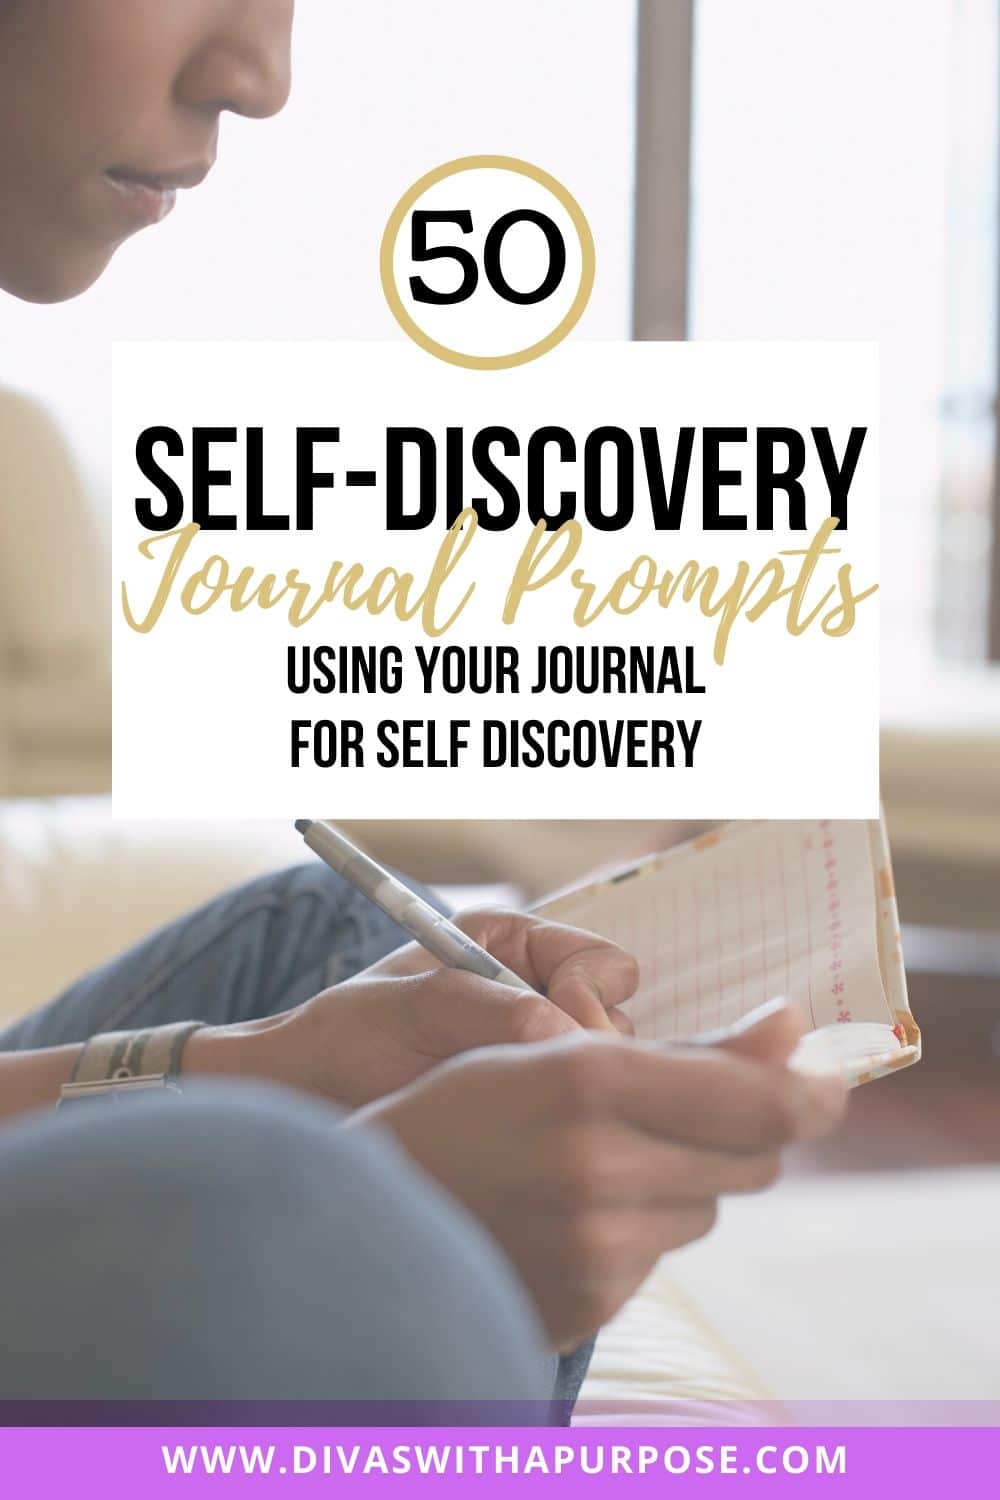 50 Self discovery journal prompts to use on your journey to self discovery and growth